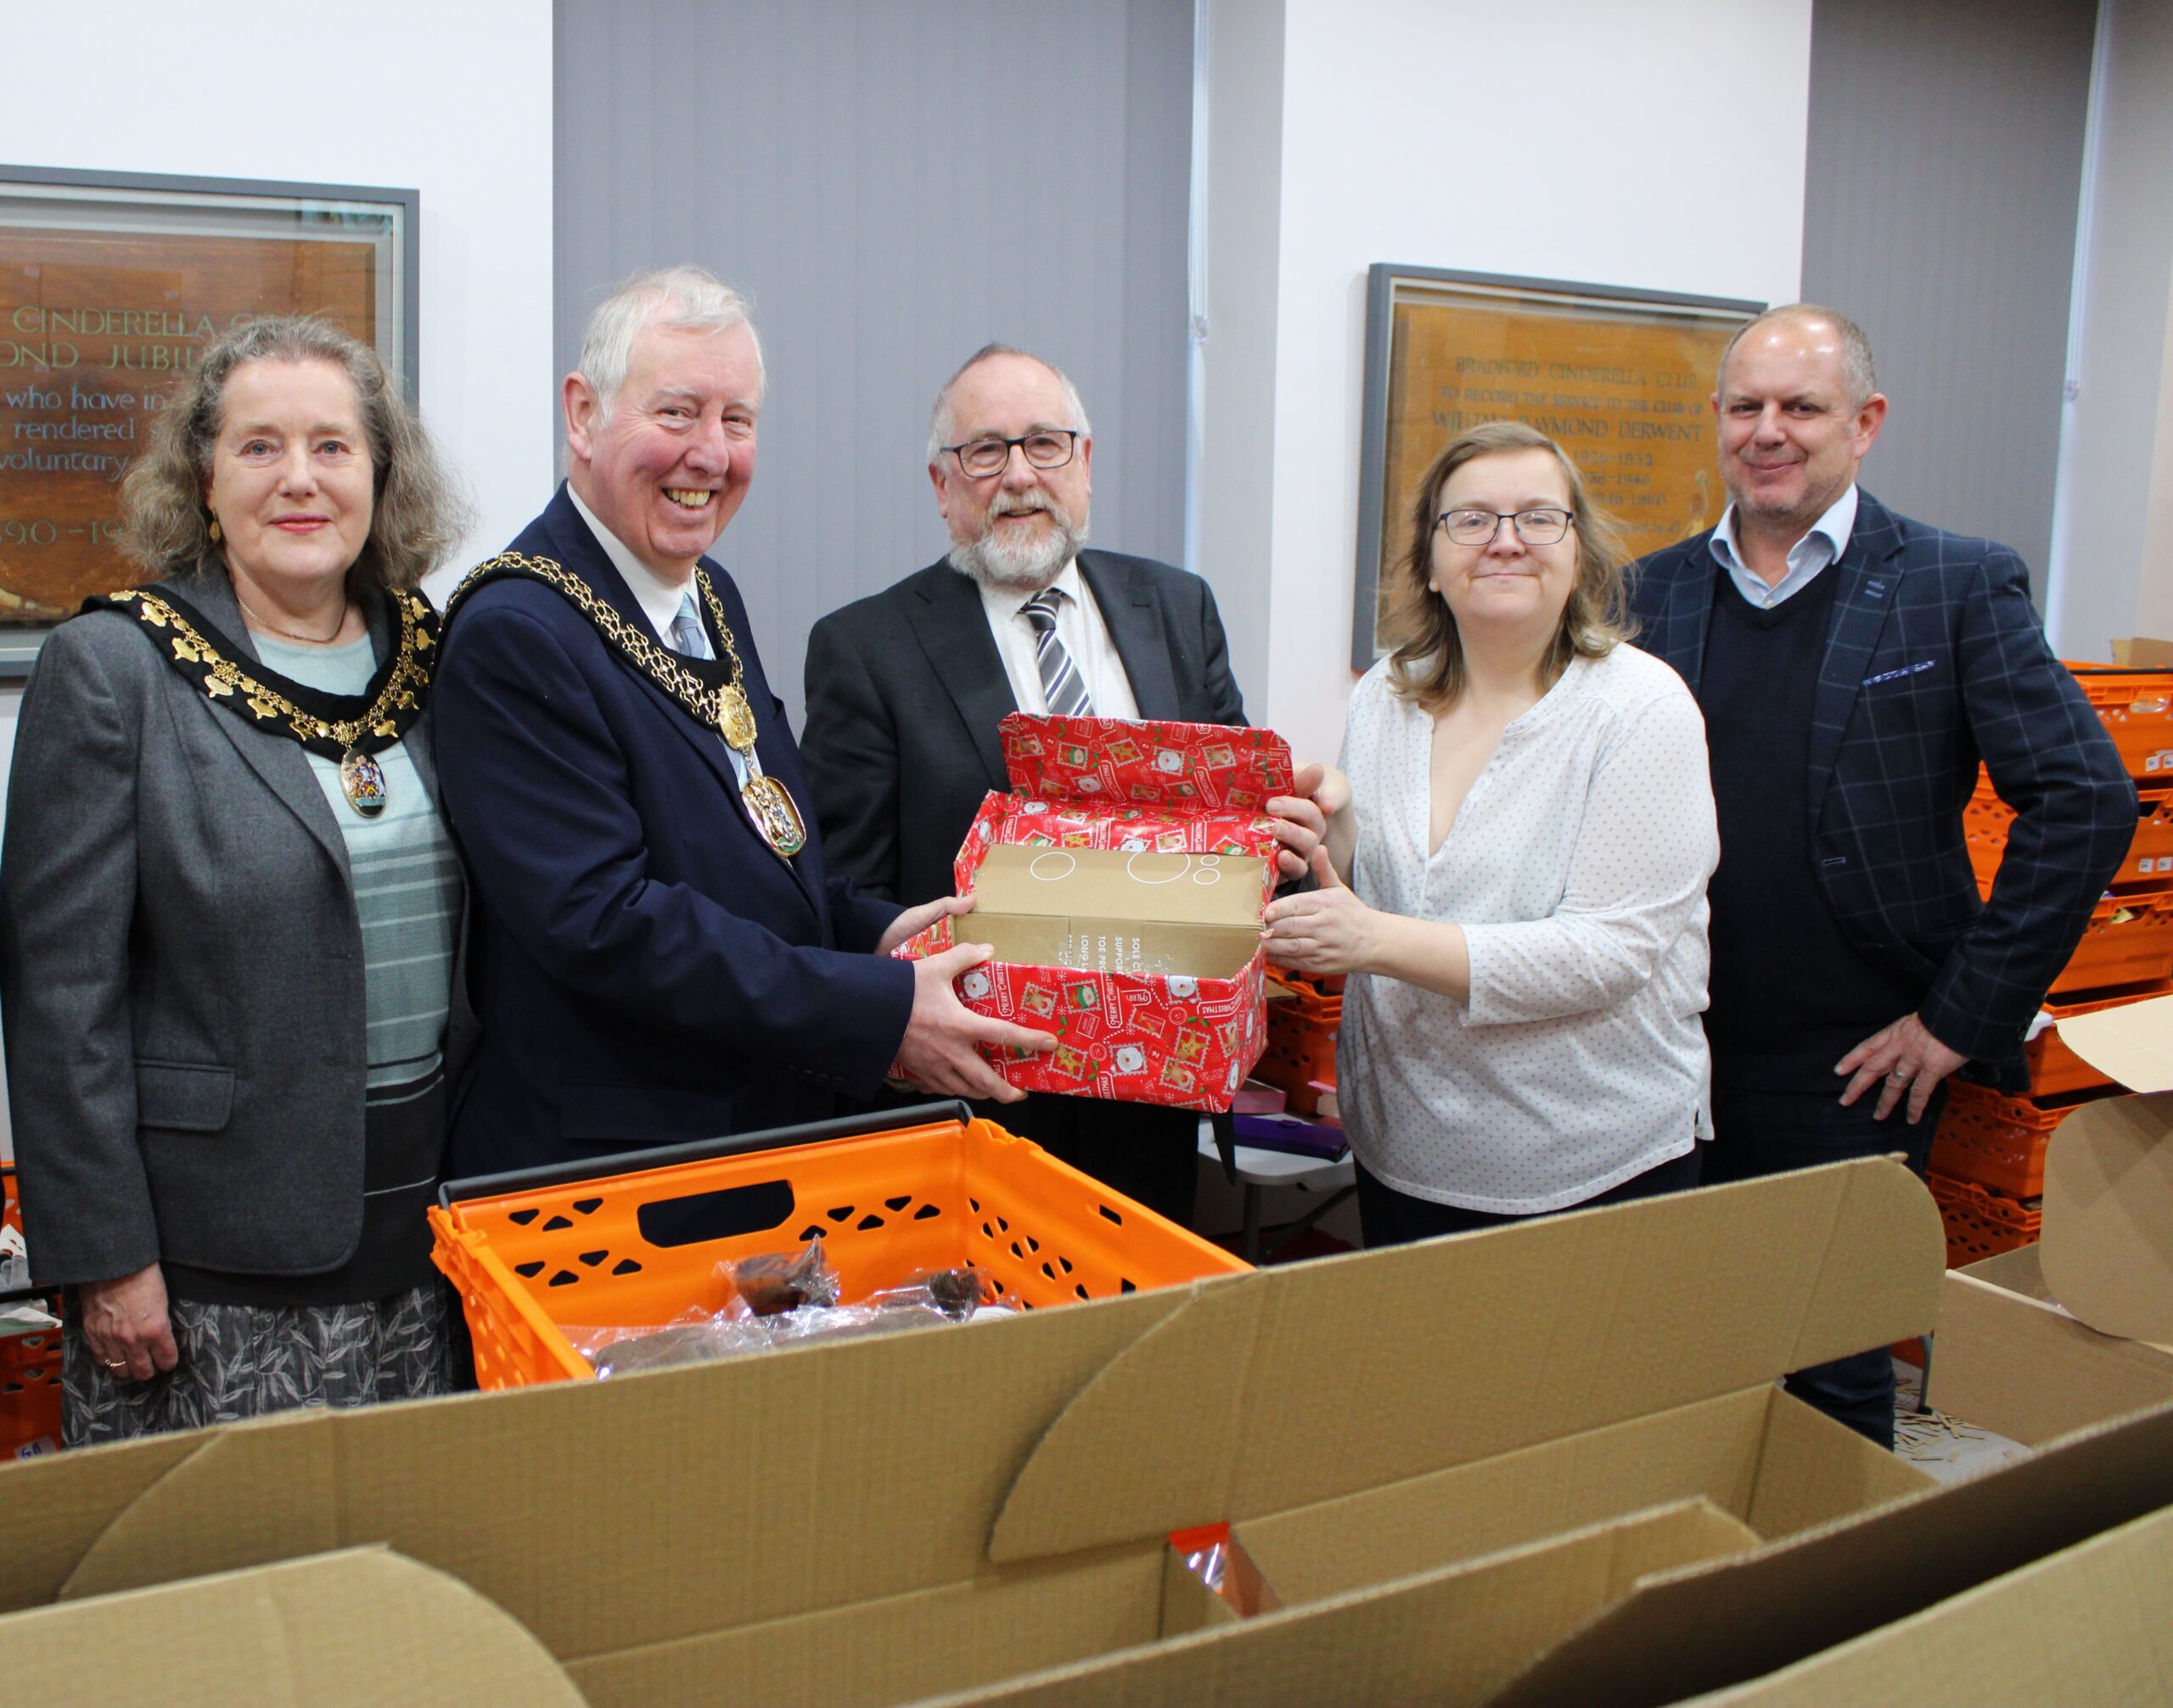 Group photo of The Lady and Lord Mayor, Terry Pearson and Rachel Thompson from the Cinderella Club and JM Glendinning Insurance Brokers Guiseley managing director, Ian Vinall, holding a shoe box.